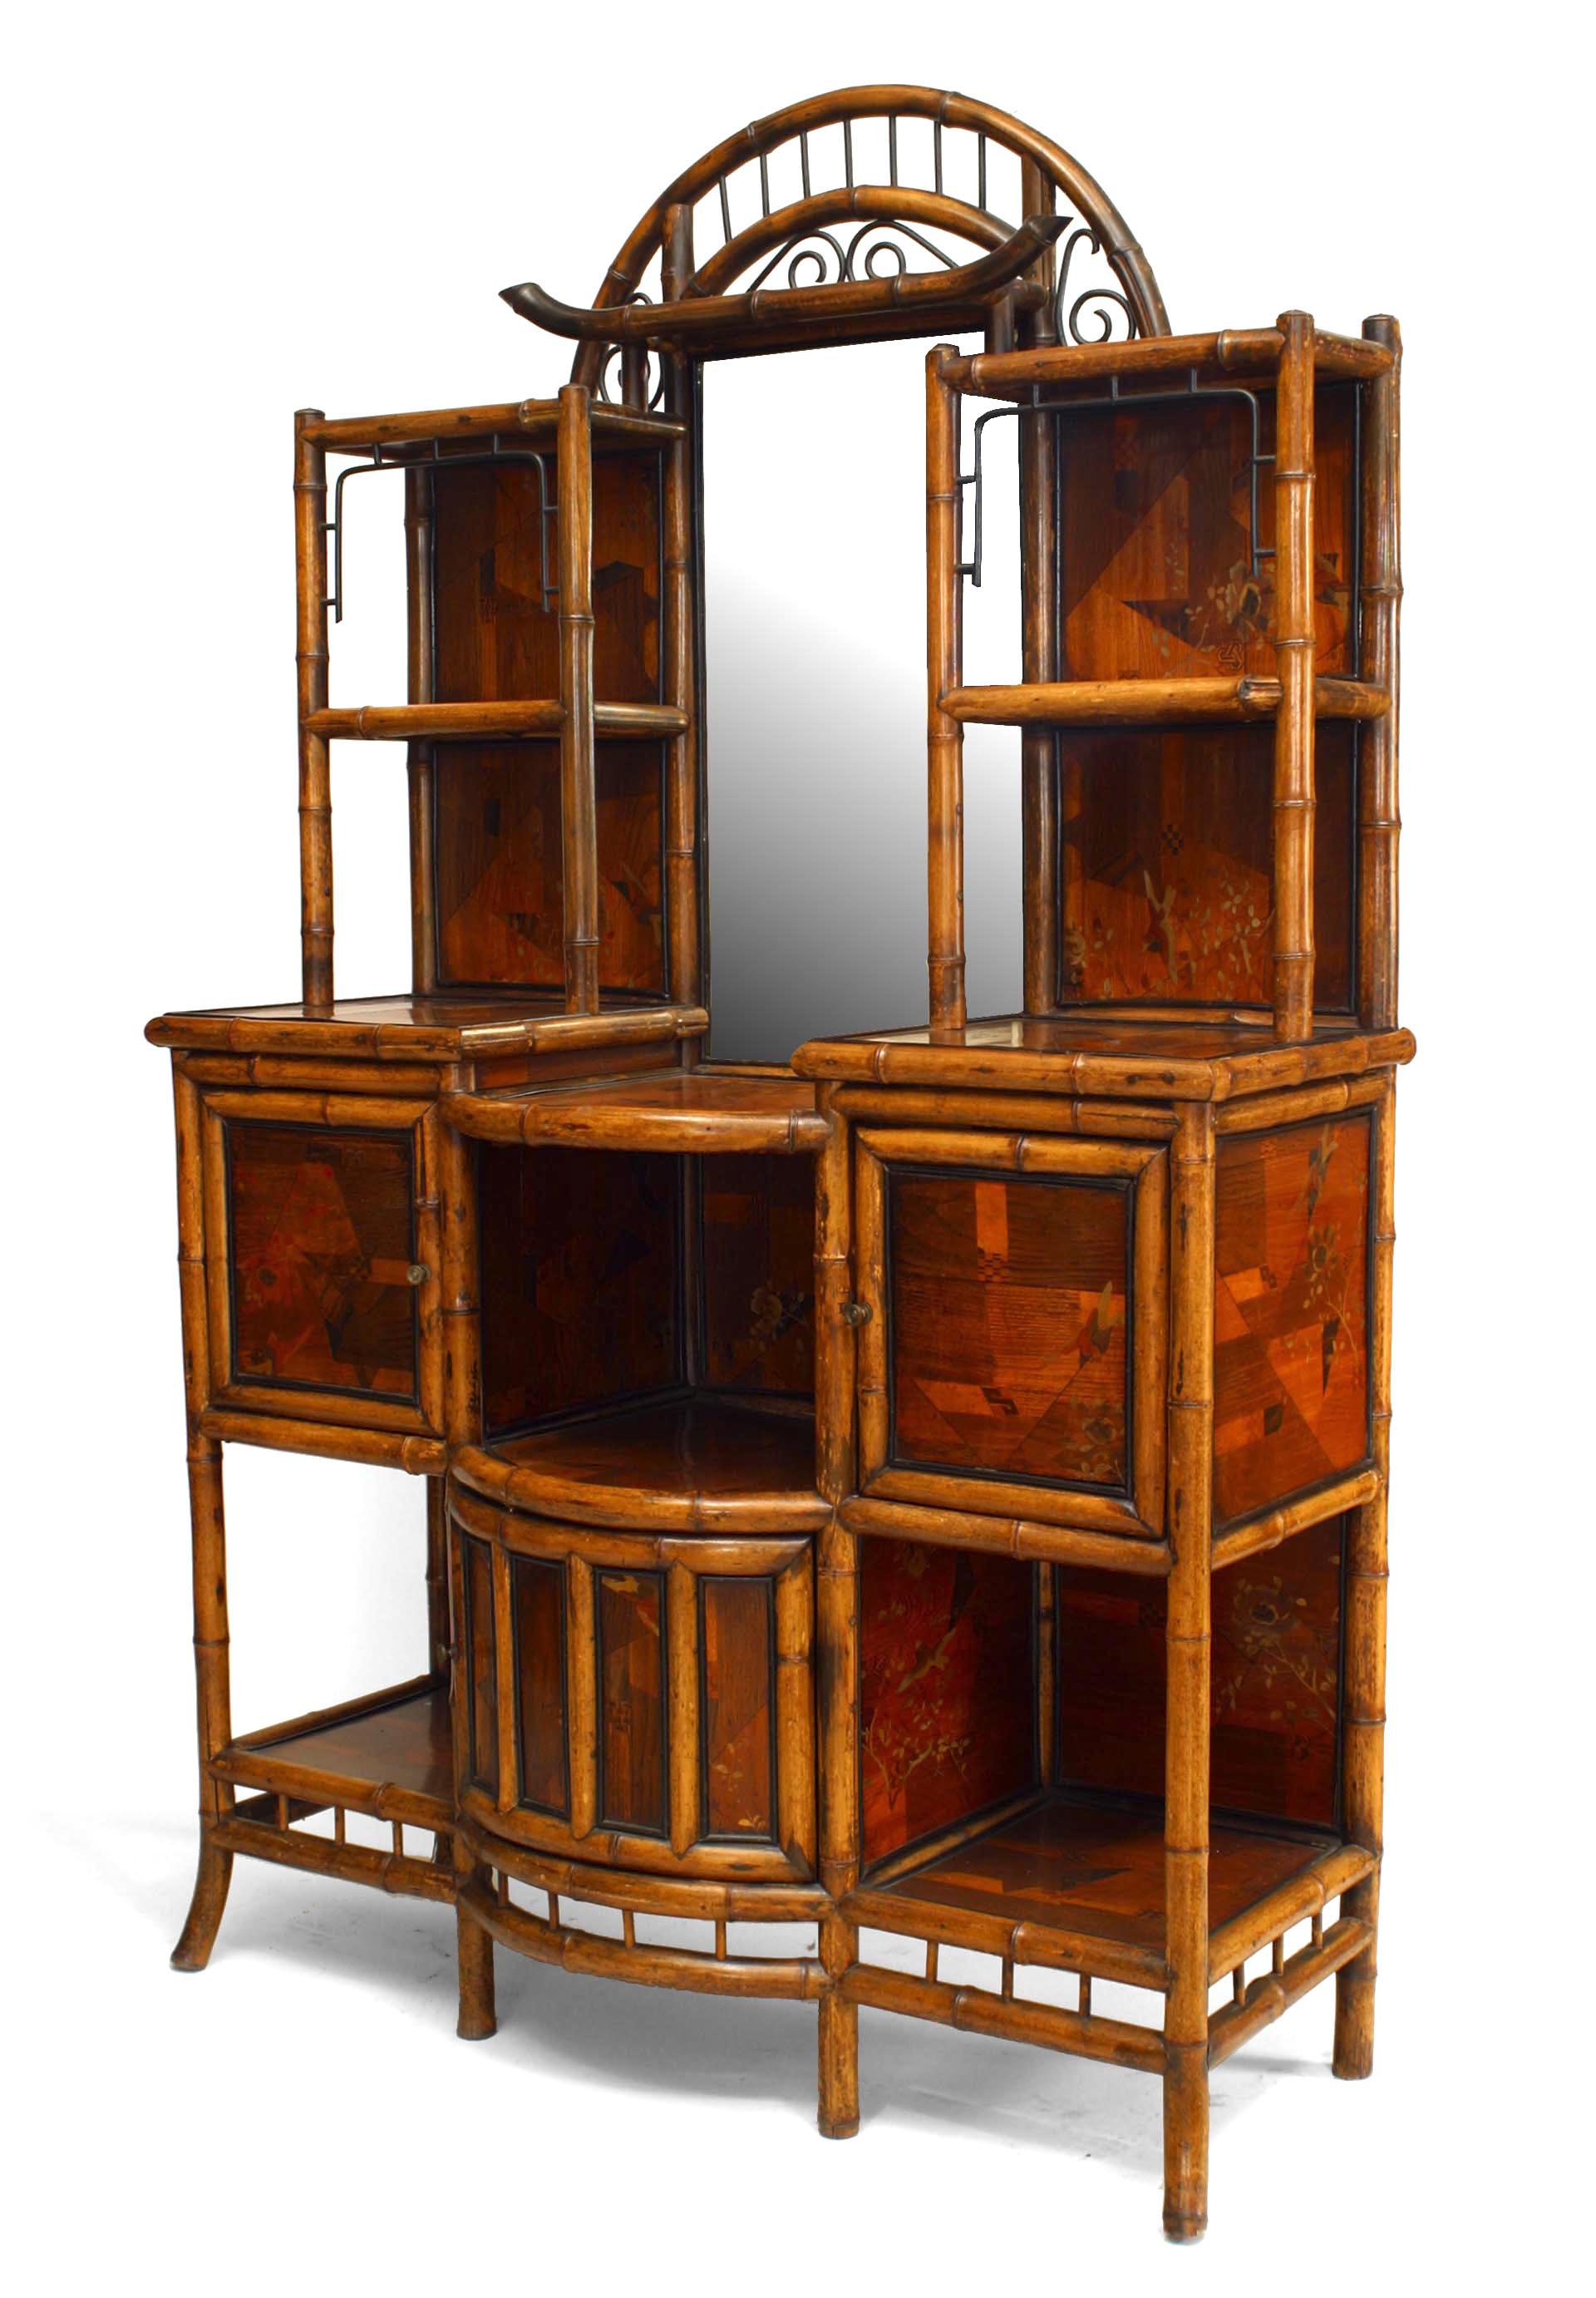 English Victorian bamboo and lacquer trimmed inlaid bow front etagere with door and mirrored back.
